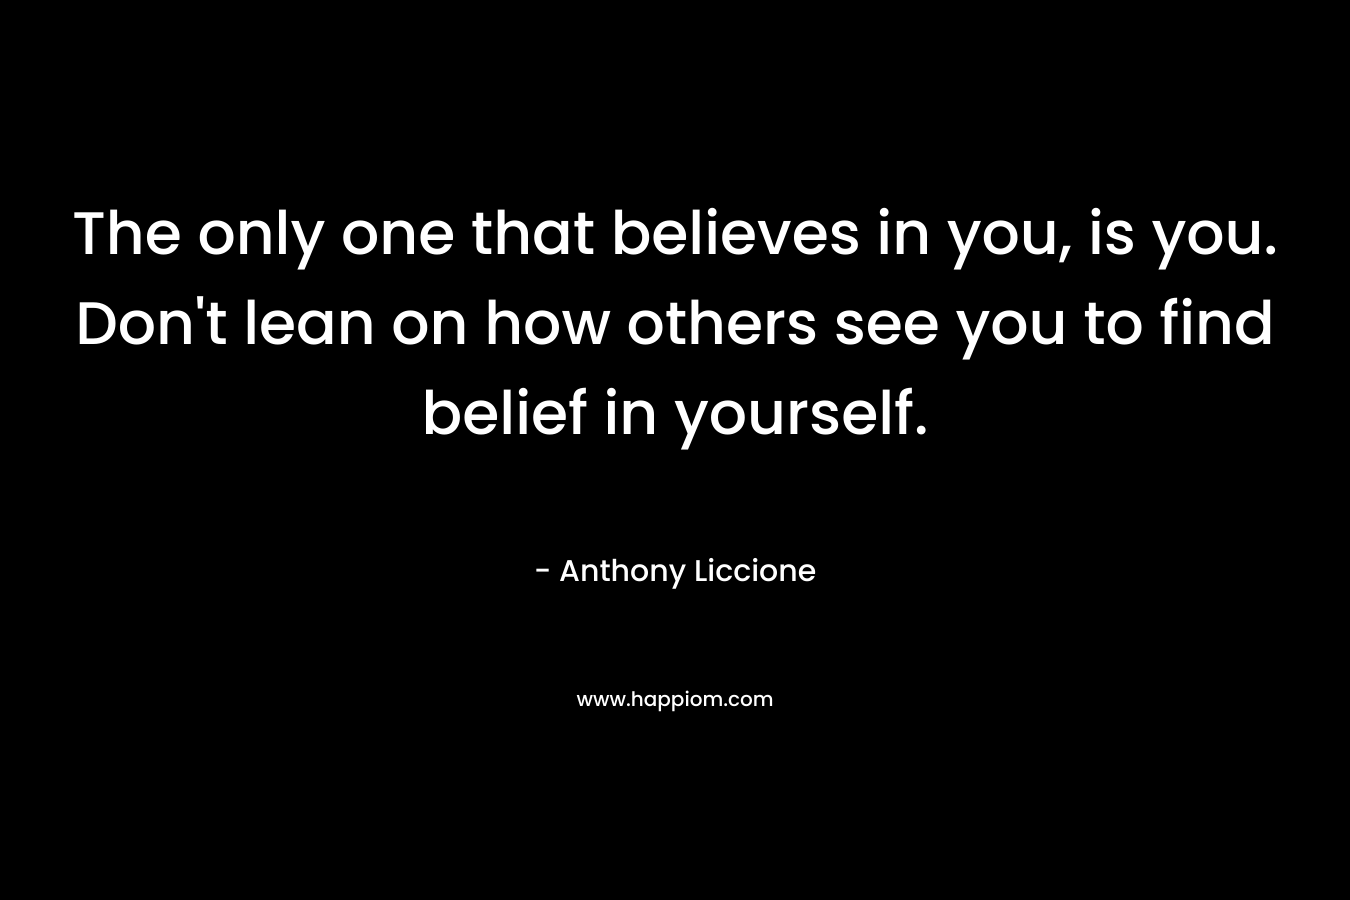 The only one that believes in you, is you. Don’t lean on how others see you to find belief in yourself. – Anthony Liccione